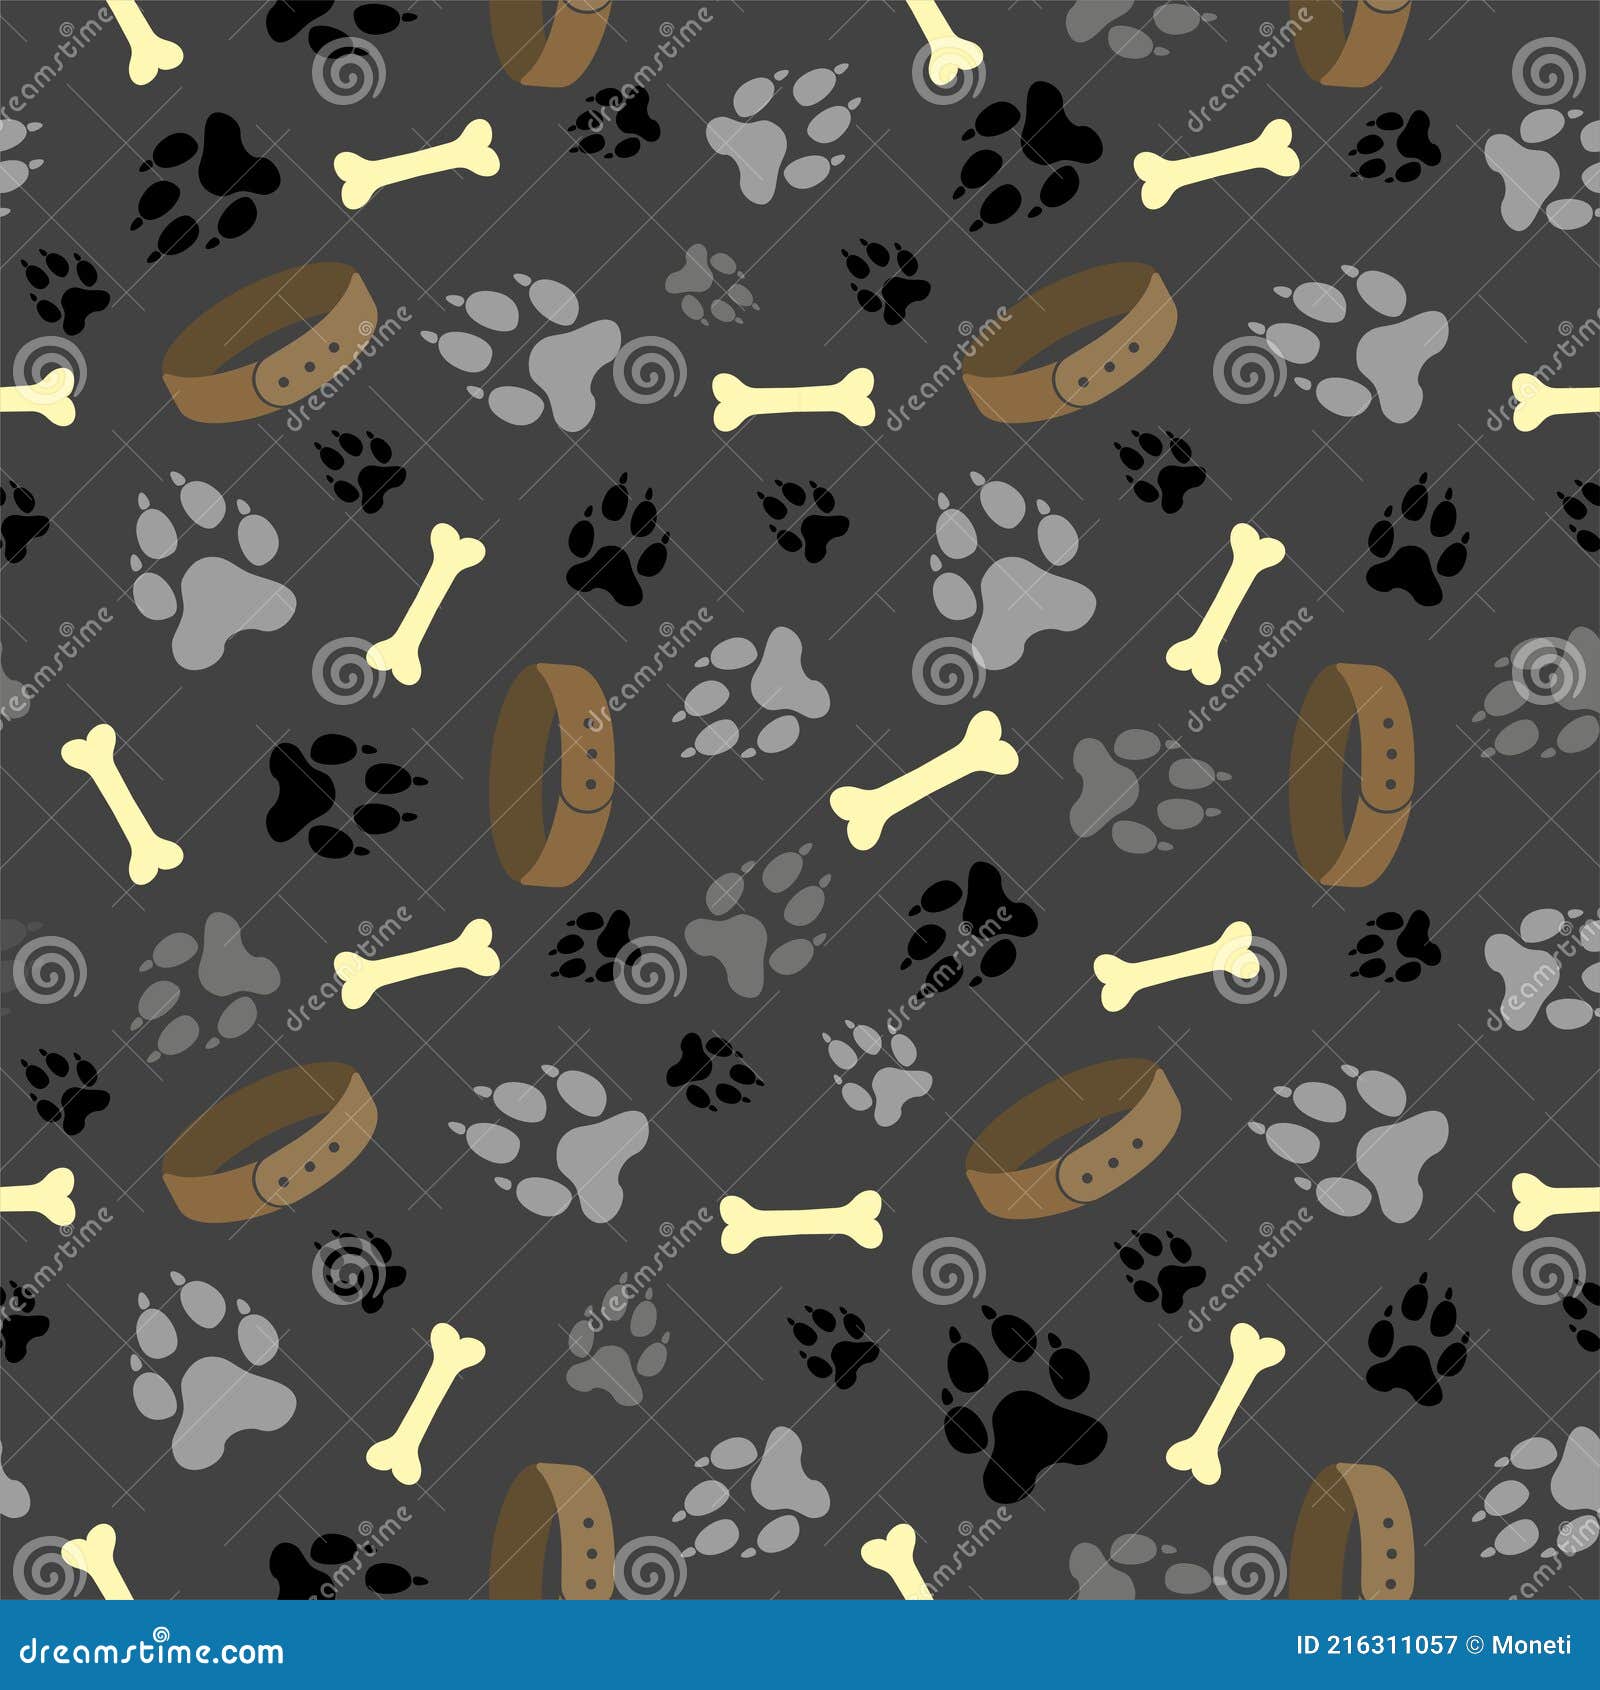 Dog Paw Seamless Vector Pattern. Dog Footprint and Bones Texture. Pattern  Wallpaper Background Stock Vector - Illustration of symbol, abstract:  216311057